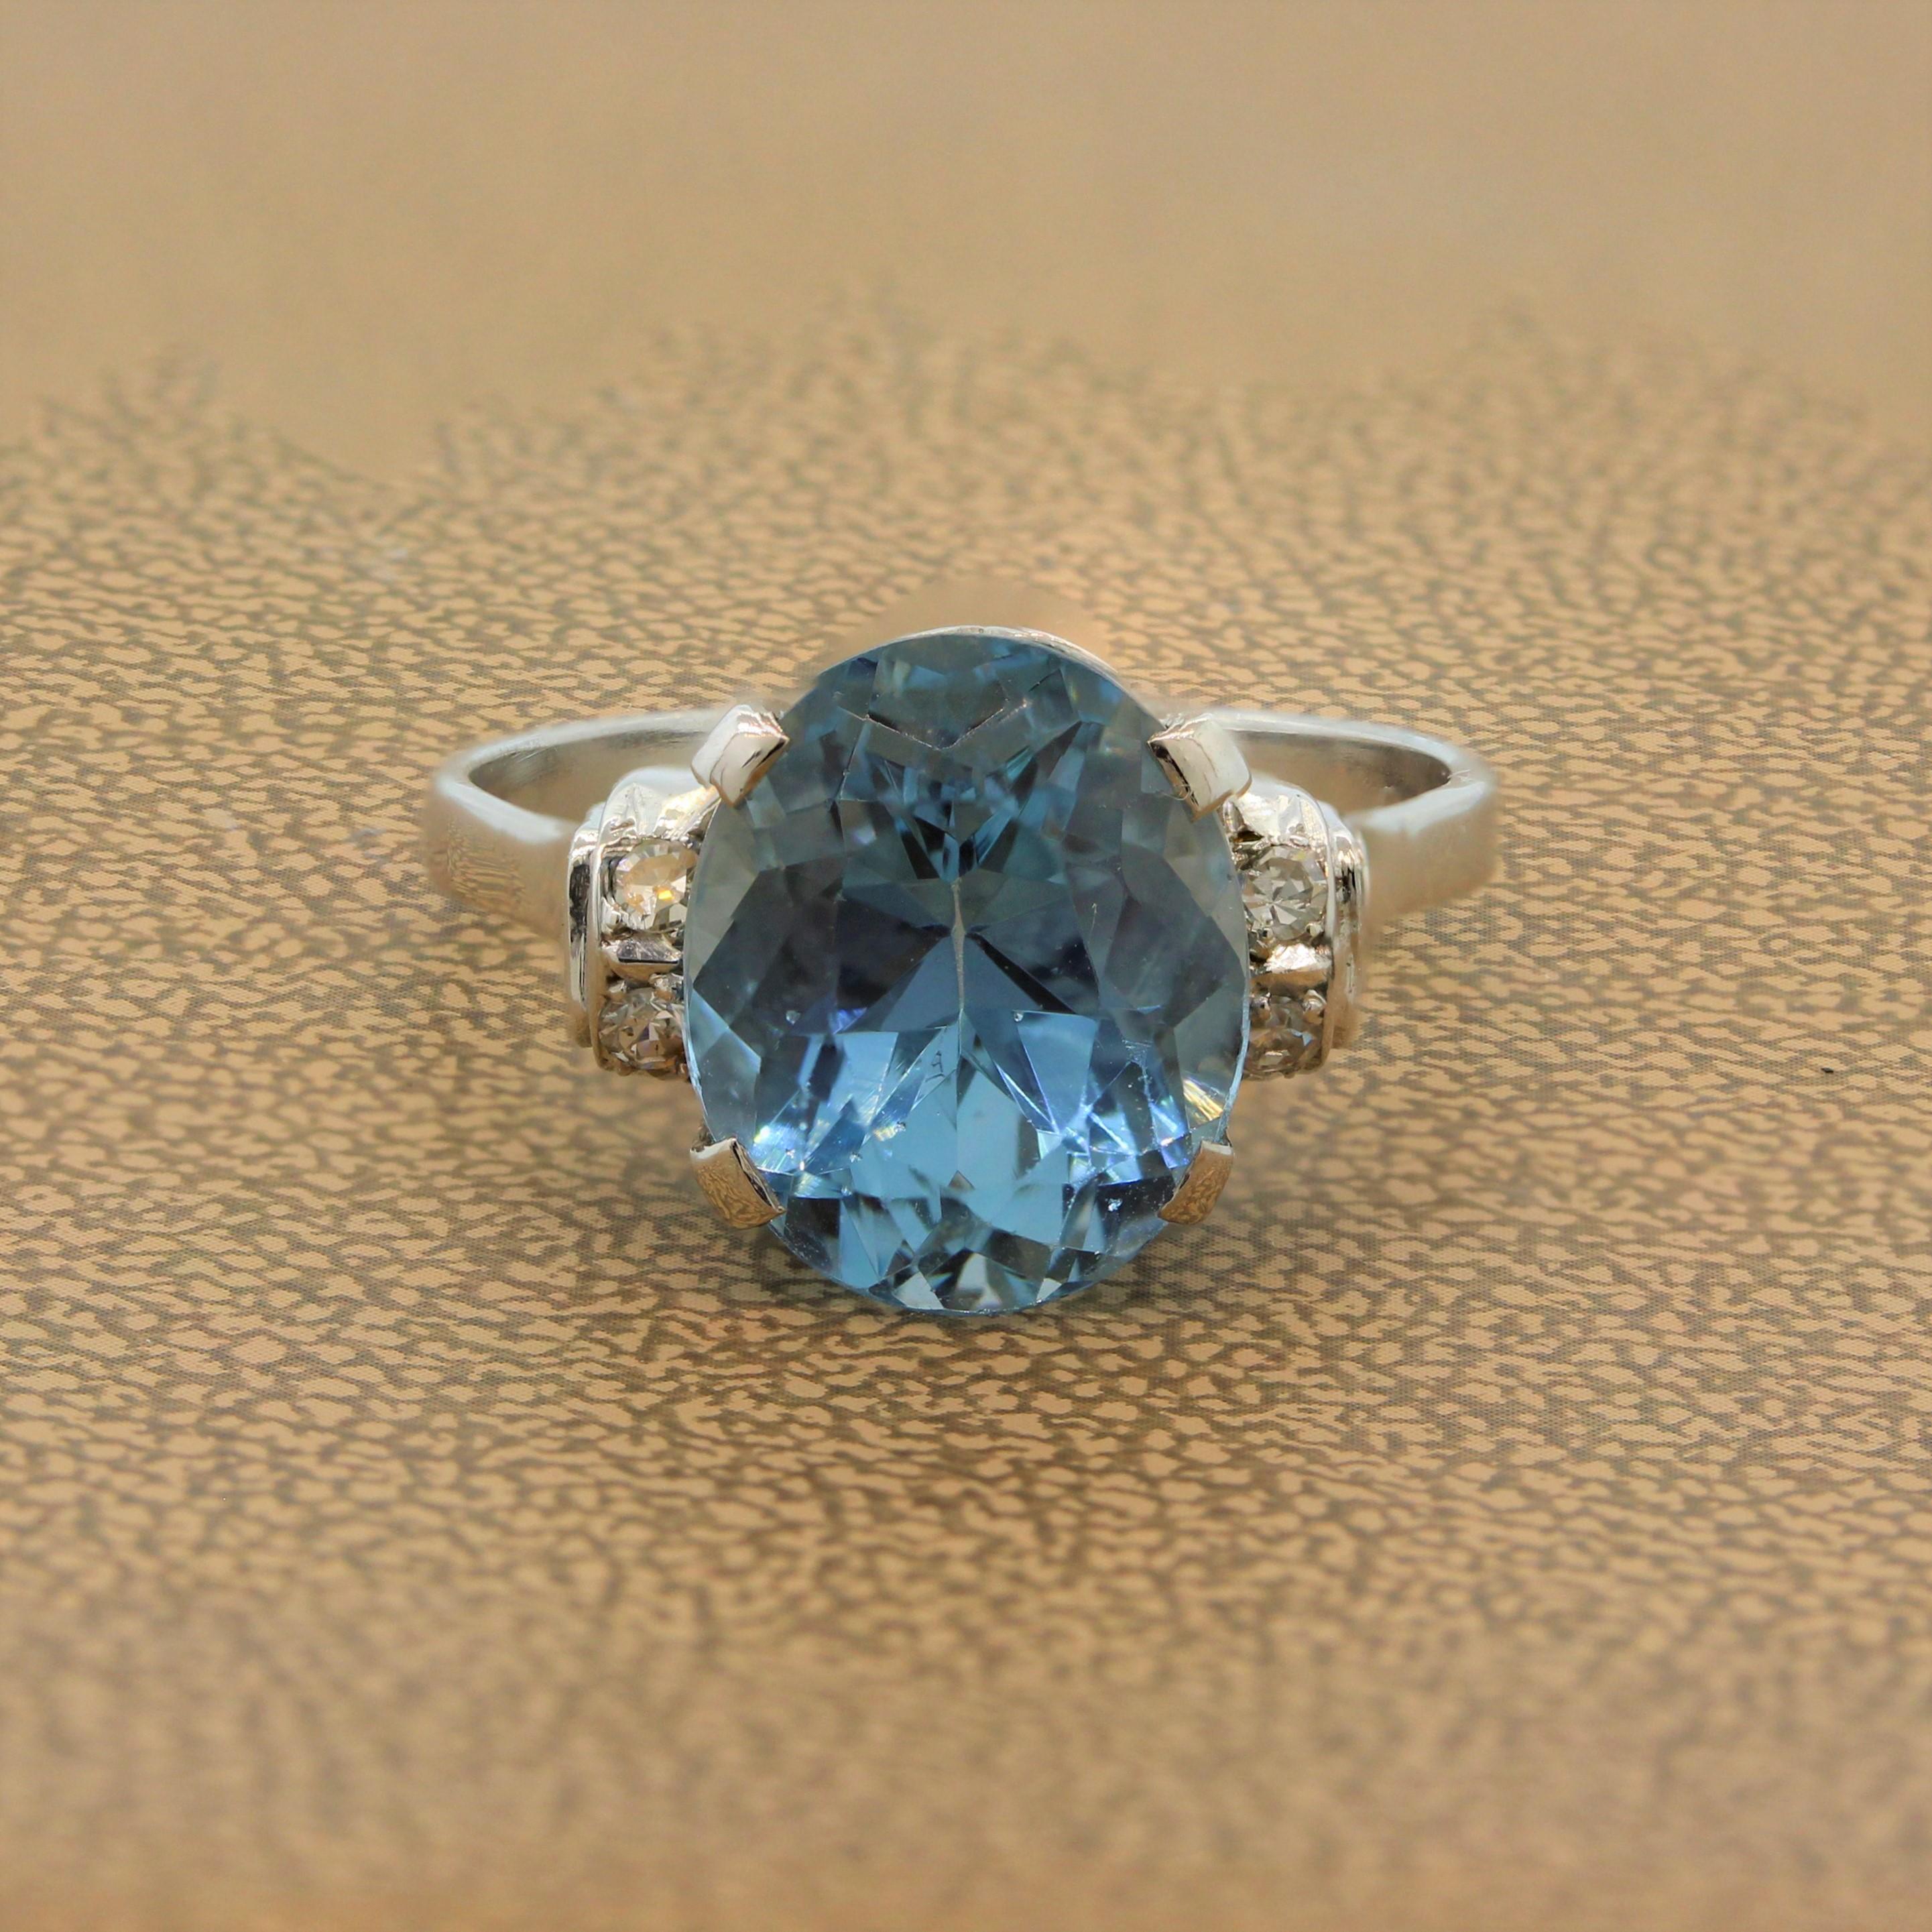 An estate ring featuring an exquisite aquamarine weighting approximately 10.00 carats. The oval cut aquamarine as a rich ocean blue color and is accented by a touch of diamonds to bring out added shine to this platinum ring.

Ring Size 9.5 (Sizable)
